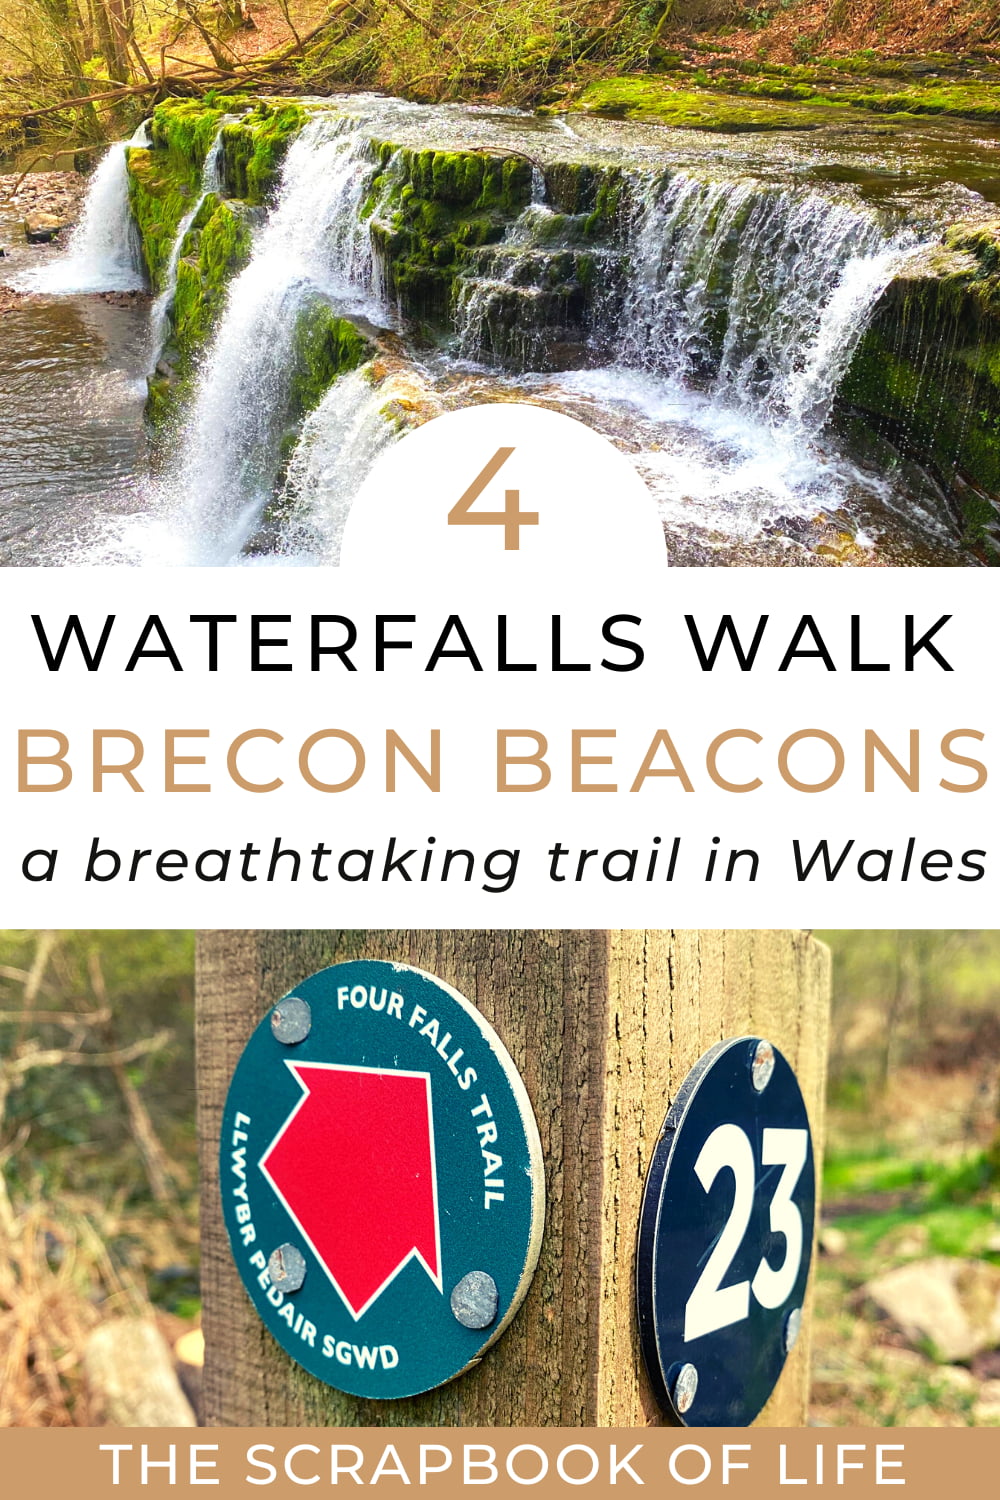 Four Waterfalls Walk Brecon Beacons - A Complete Guide, FAQs + Tips